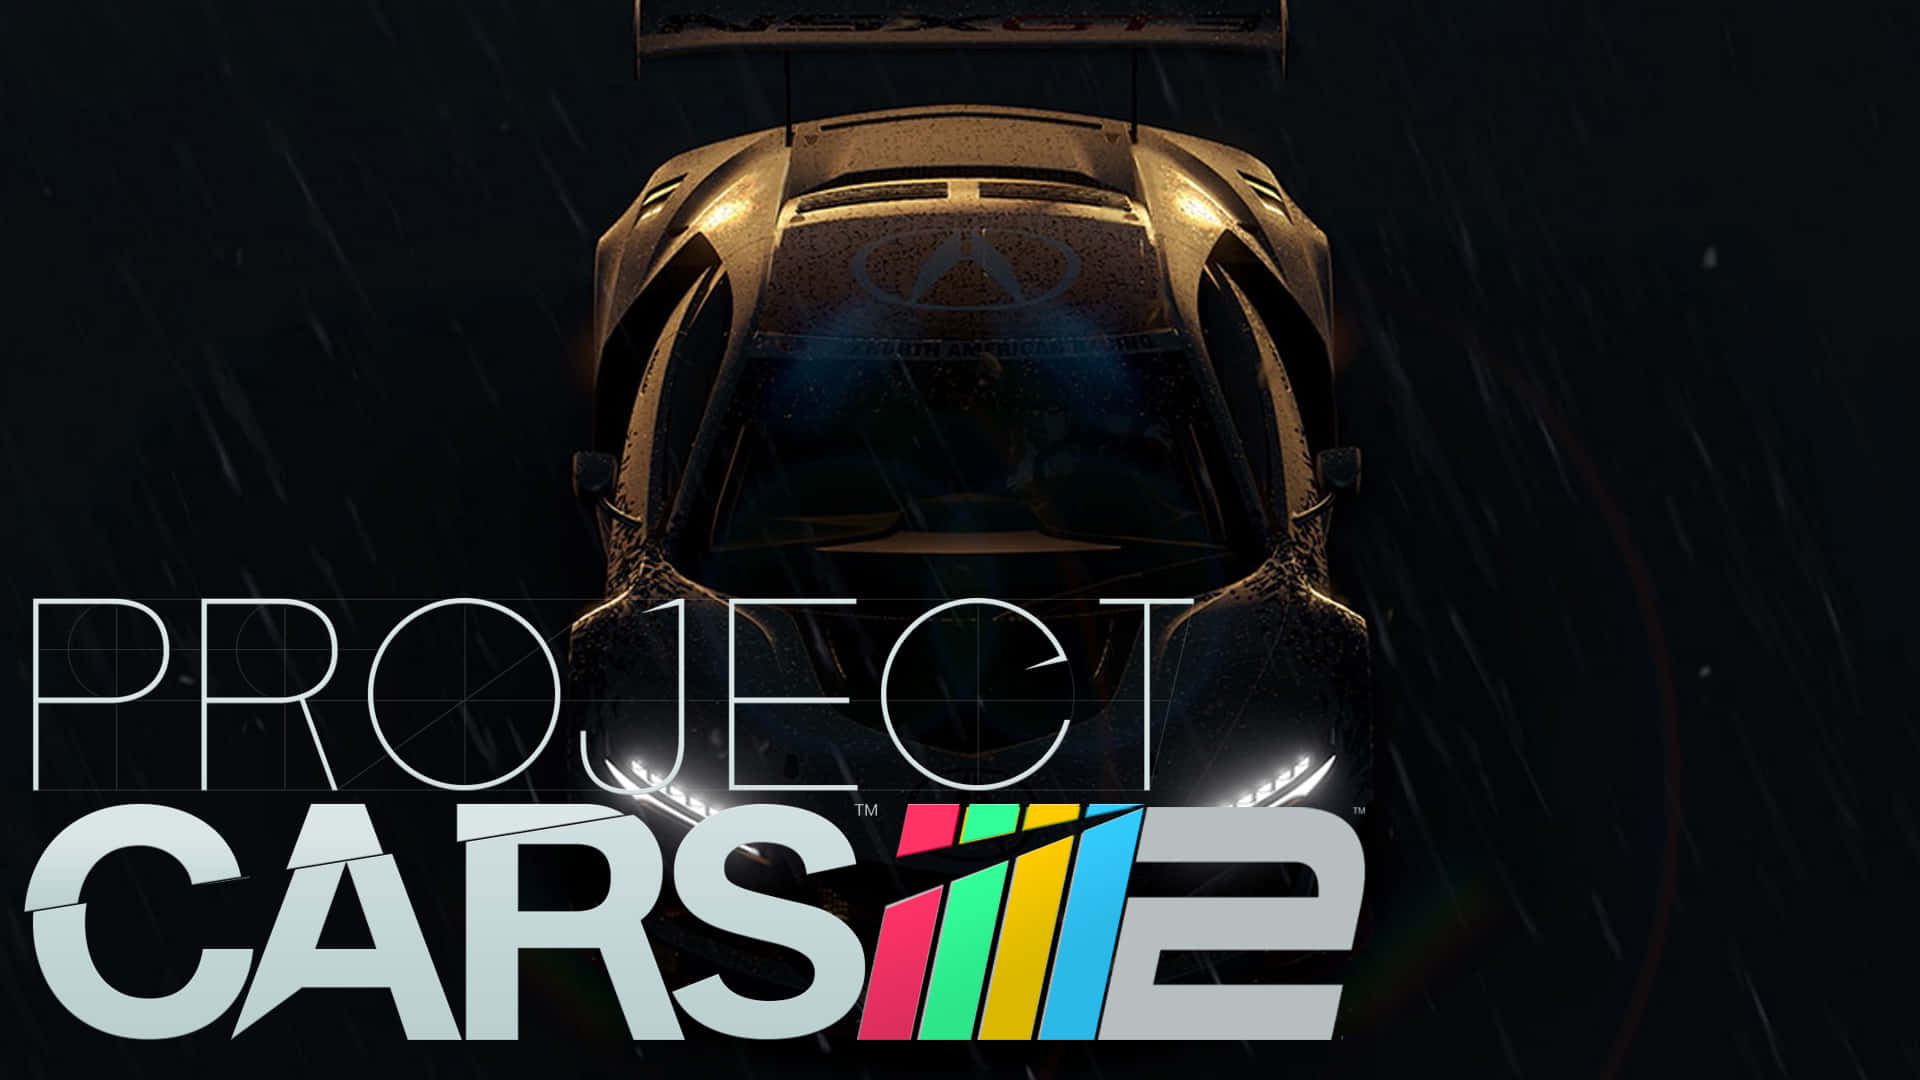 Enjoy the fast-paced challenge of HD Project Cars 2.